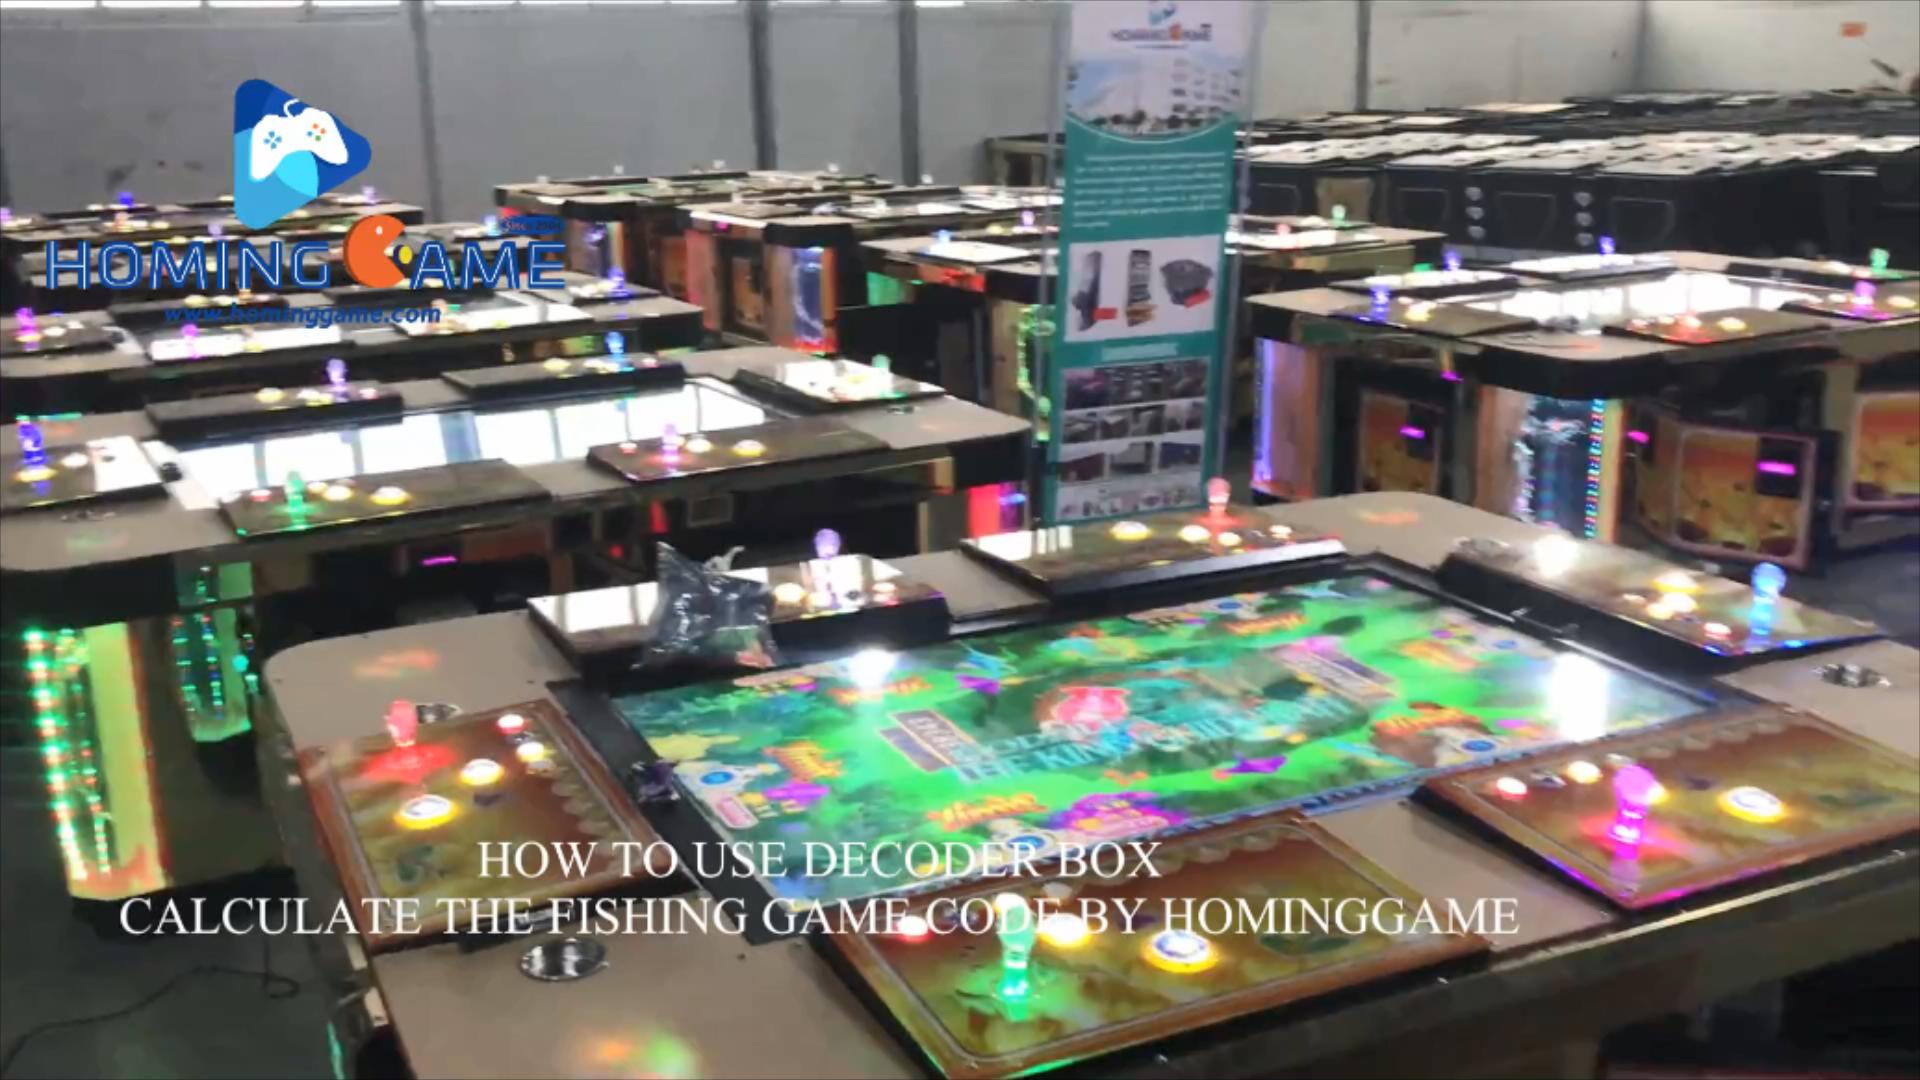 How to use the decoder box to calculate the Godzilla1,2,3,Aliens Vs Termination,Rampage,Dragon Legend,Dragon Slayer,zombie Awaken fishing game code by HomingGame(Order Call Whatsapp:+8618688409495),Fising Game Machine Skills,How to Play the Fishing Table Game Machine by HomingGame(Order call whatsapp:+8618688409495),fishing game,fishing table,fishing table game machine,fishing game machine,fishing arcade game machine,fish hunter fishing game machine,upright table fishing game machine,standup fishing game machine,ocean king 3 fishing game machine,capatian america fishing game machine,tiger stirke fishing game machine,godzilla fishing game machine,rampage fishing game machine,dragon legend fishing game machine,ocean king,igs fishing game machine,electrical fishing game machine,usa fishing game machine,ocean king 2 fishing gam emachine,fishing game machine supplier,fishing game machine manufacturer,gaming machine,gambling machine,game machine,arcade game machine,coin operated game machine,indoor game machine,electrical game machine,amusement park game equipment,amusement machine,gaming,casino gaming machine,usa fishing game machine supplier,USA fishing table game machine manufacturer,fishing game cheats,fishing game skills,how to paly the fishing game machine,fishing game decoding,fishing game decoder box,hominggame,www.gametube.hk,hominggame fishing game,entertainment game machine,family entertainment game machine,arcade game machine for sale